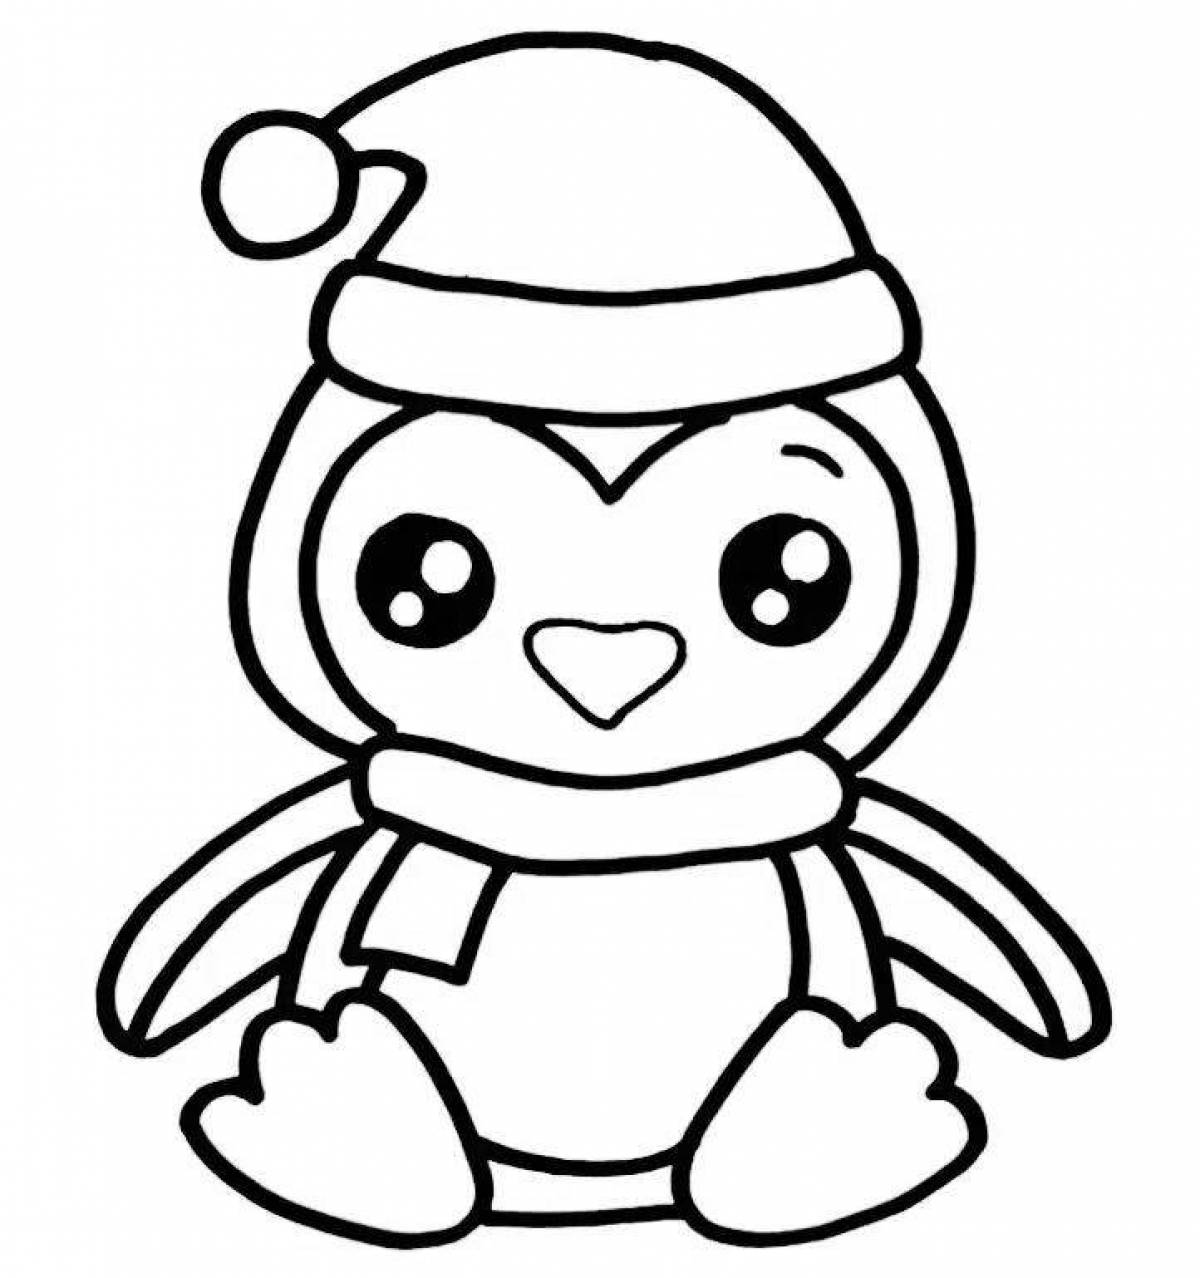 Amazing penguin coloring pages